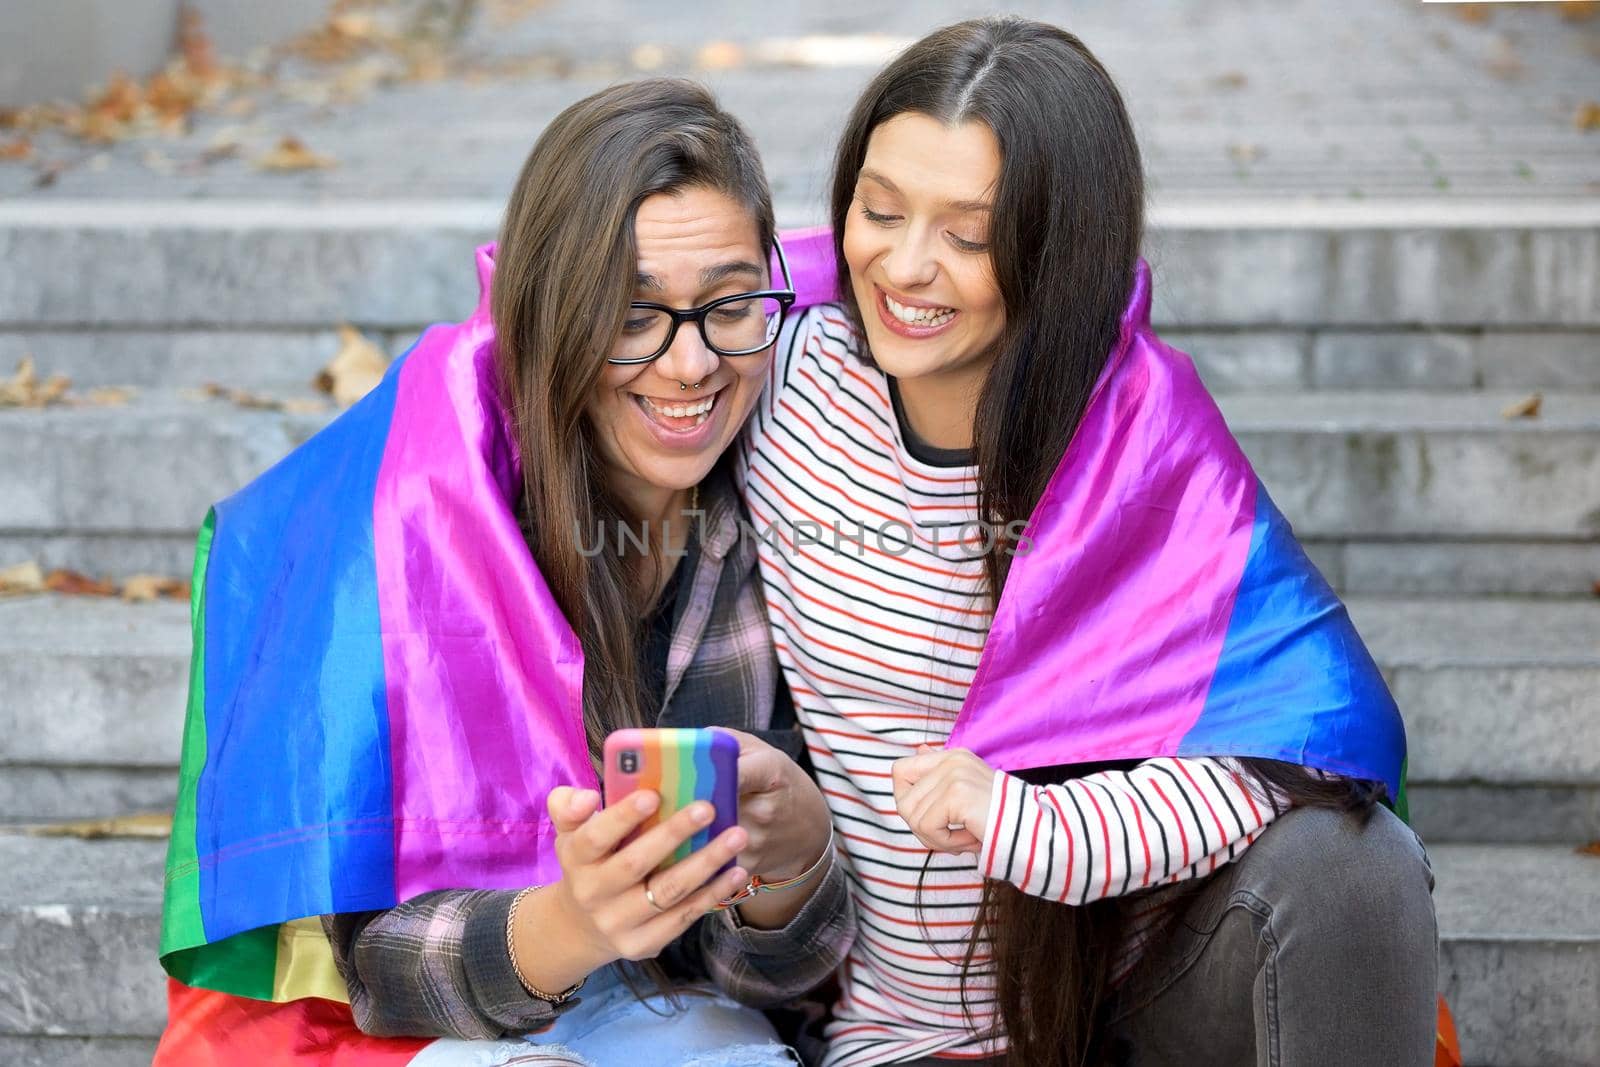 Beautiful lesbian couple with rainbow flag using a mobile phone in the street. by HERRAEZ